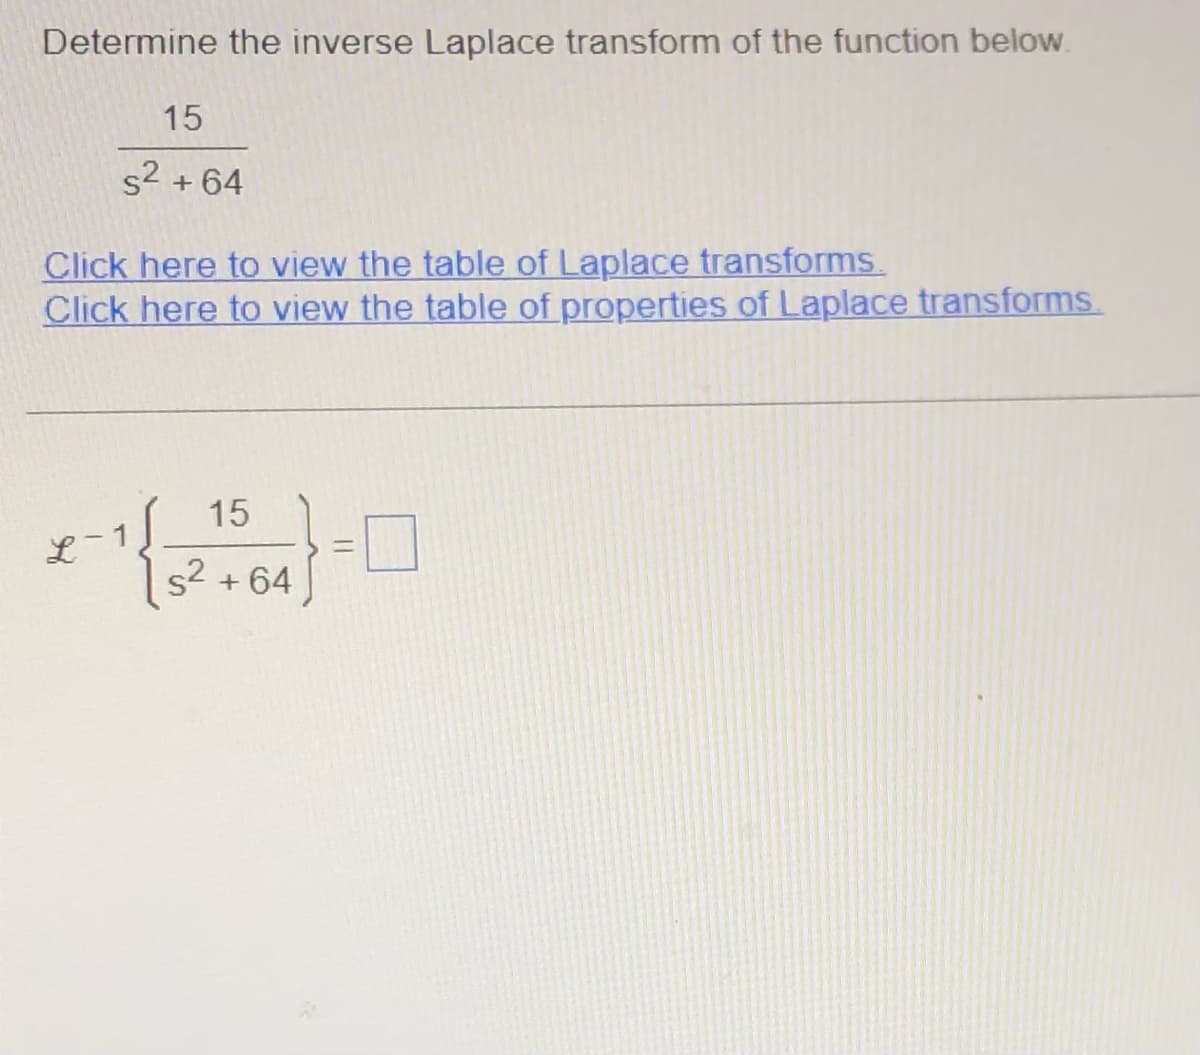 Determine the inverse Laplace transform of the function below.
15
s² +64
Click here to view the table of Laplace transforms.
Click here to view the table of properties of Laplace transforms.
-1{
15
s² +64